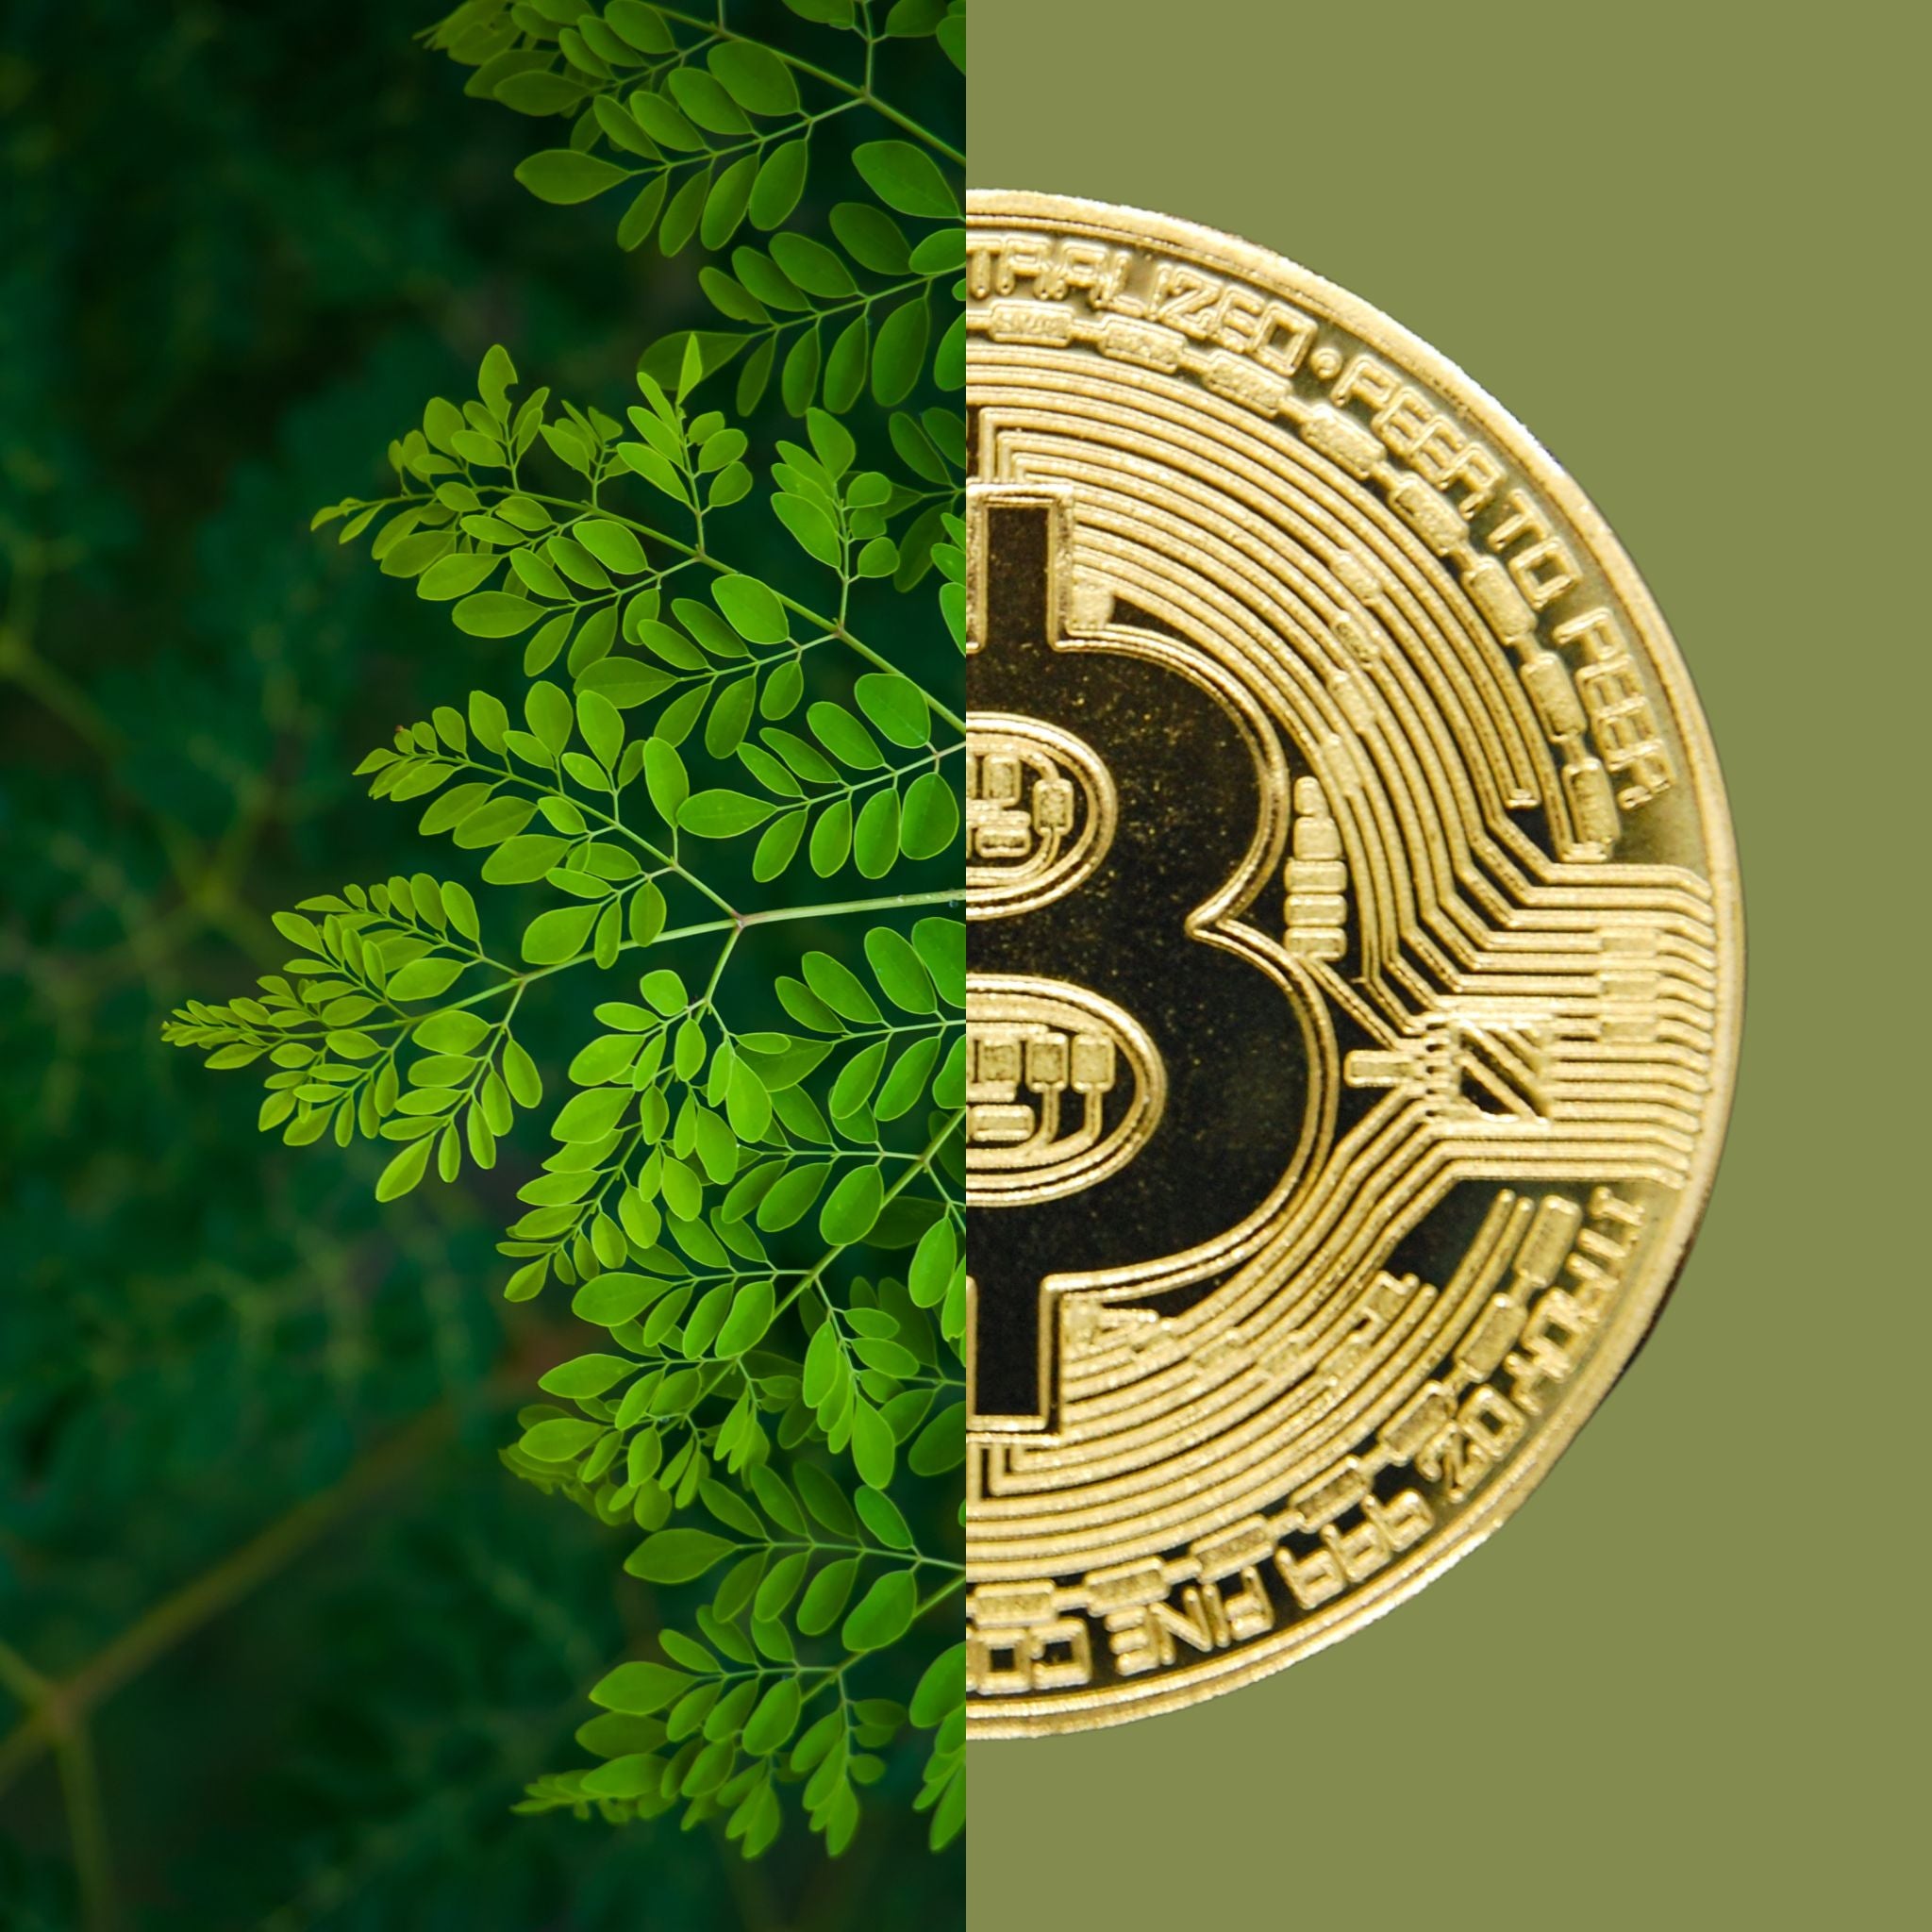 Comparison of Moringa tree health benefits and cryptocurrency financial freedom, highlighting the permissionless nature of both systems for self-sufficient wellness and finance